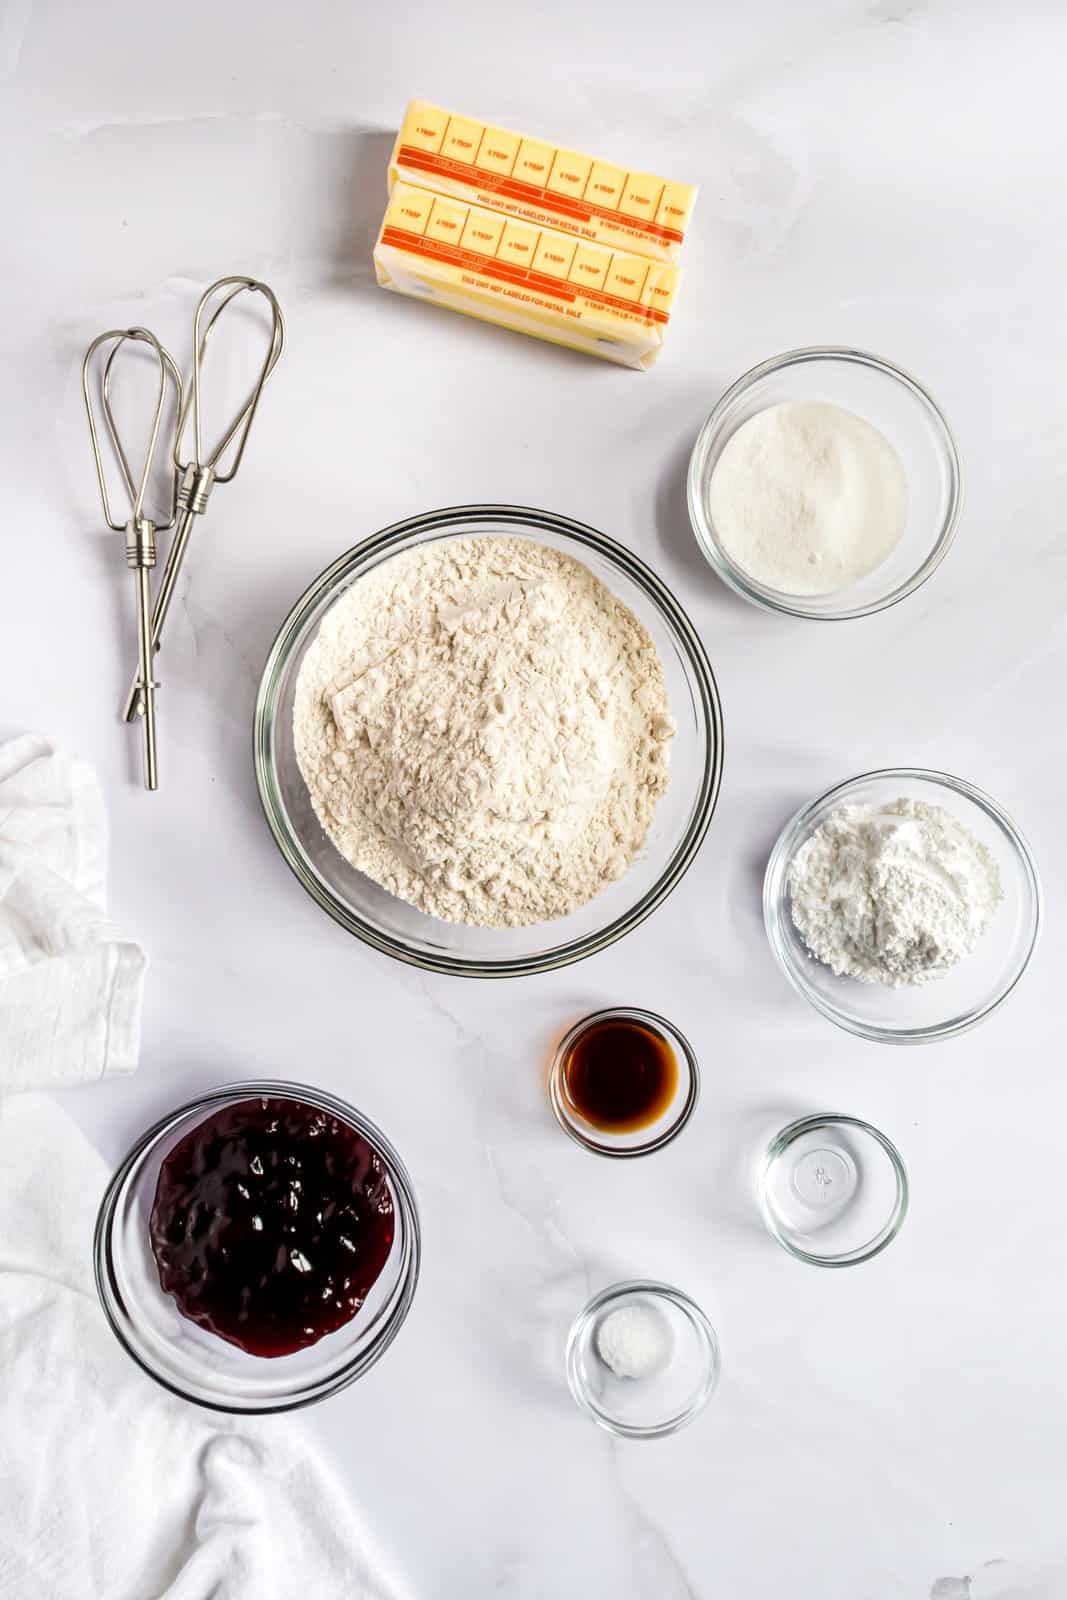 Ingredients needed:unsalted butter, granulated sugar, powdered sugar, vanilla extract, almond extract, all purpose flour, kosher salt and seedless raspberry jam.